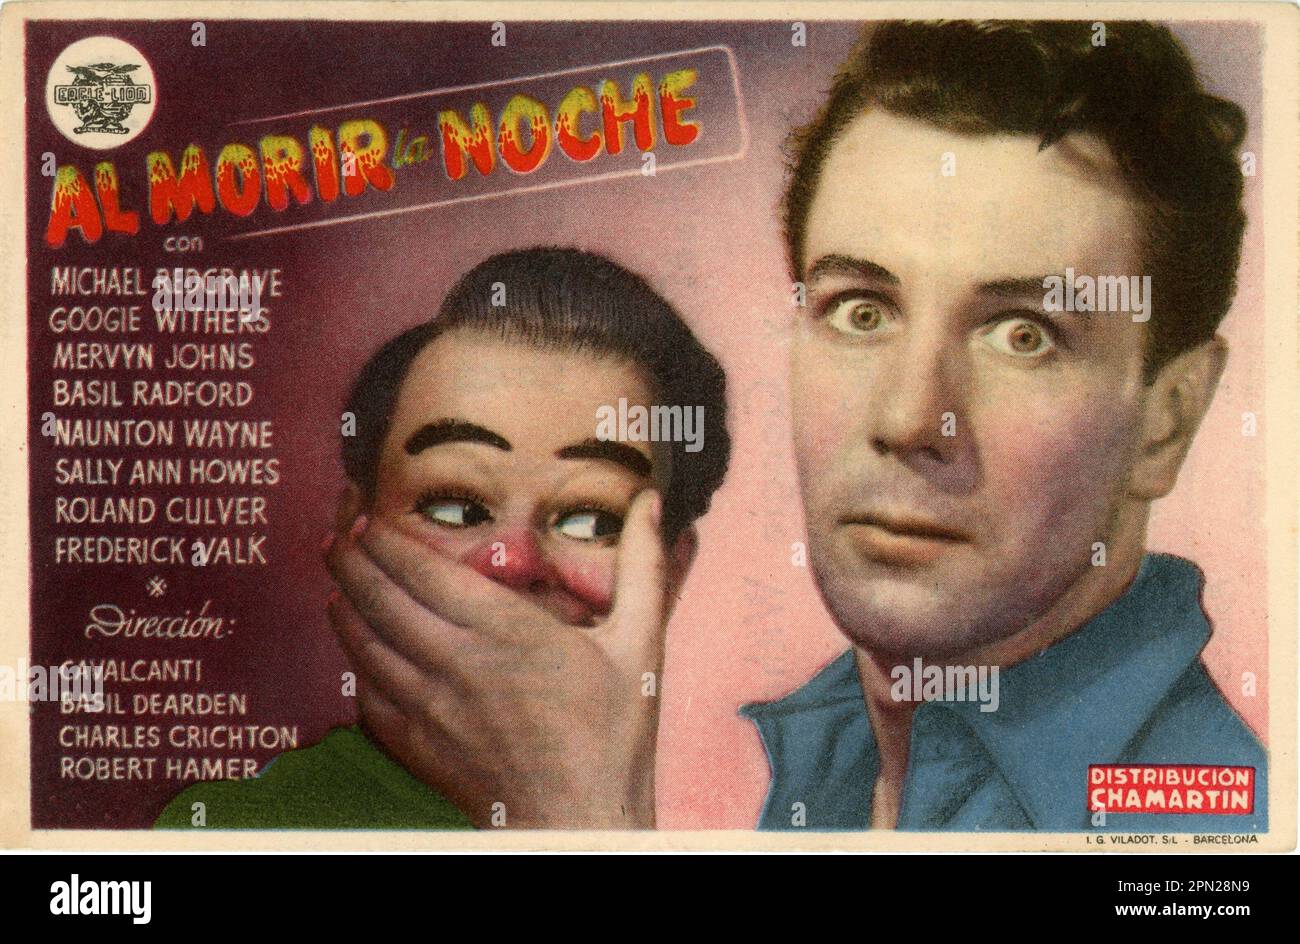 Spanish Flyer for MICHAEL REDGRAVE in The Ventriloquist's Dummy story directed by ALBERTO CAVALCANTI from story by John Baines in DEAD OF NIGHT 1945 directors ALBERTO CAVALCANTI CHARLES CRICHTON BASIL DEARDEN and ROBERT HAMER music Georges Auric producer Michael Balcon Ealing Studios / Eagle - Lion Distributors Limited Stock Photo